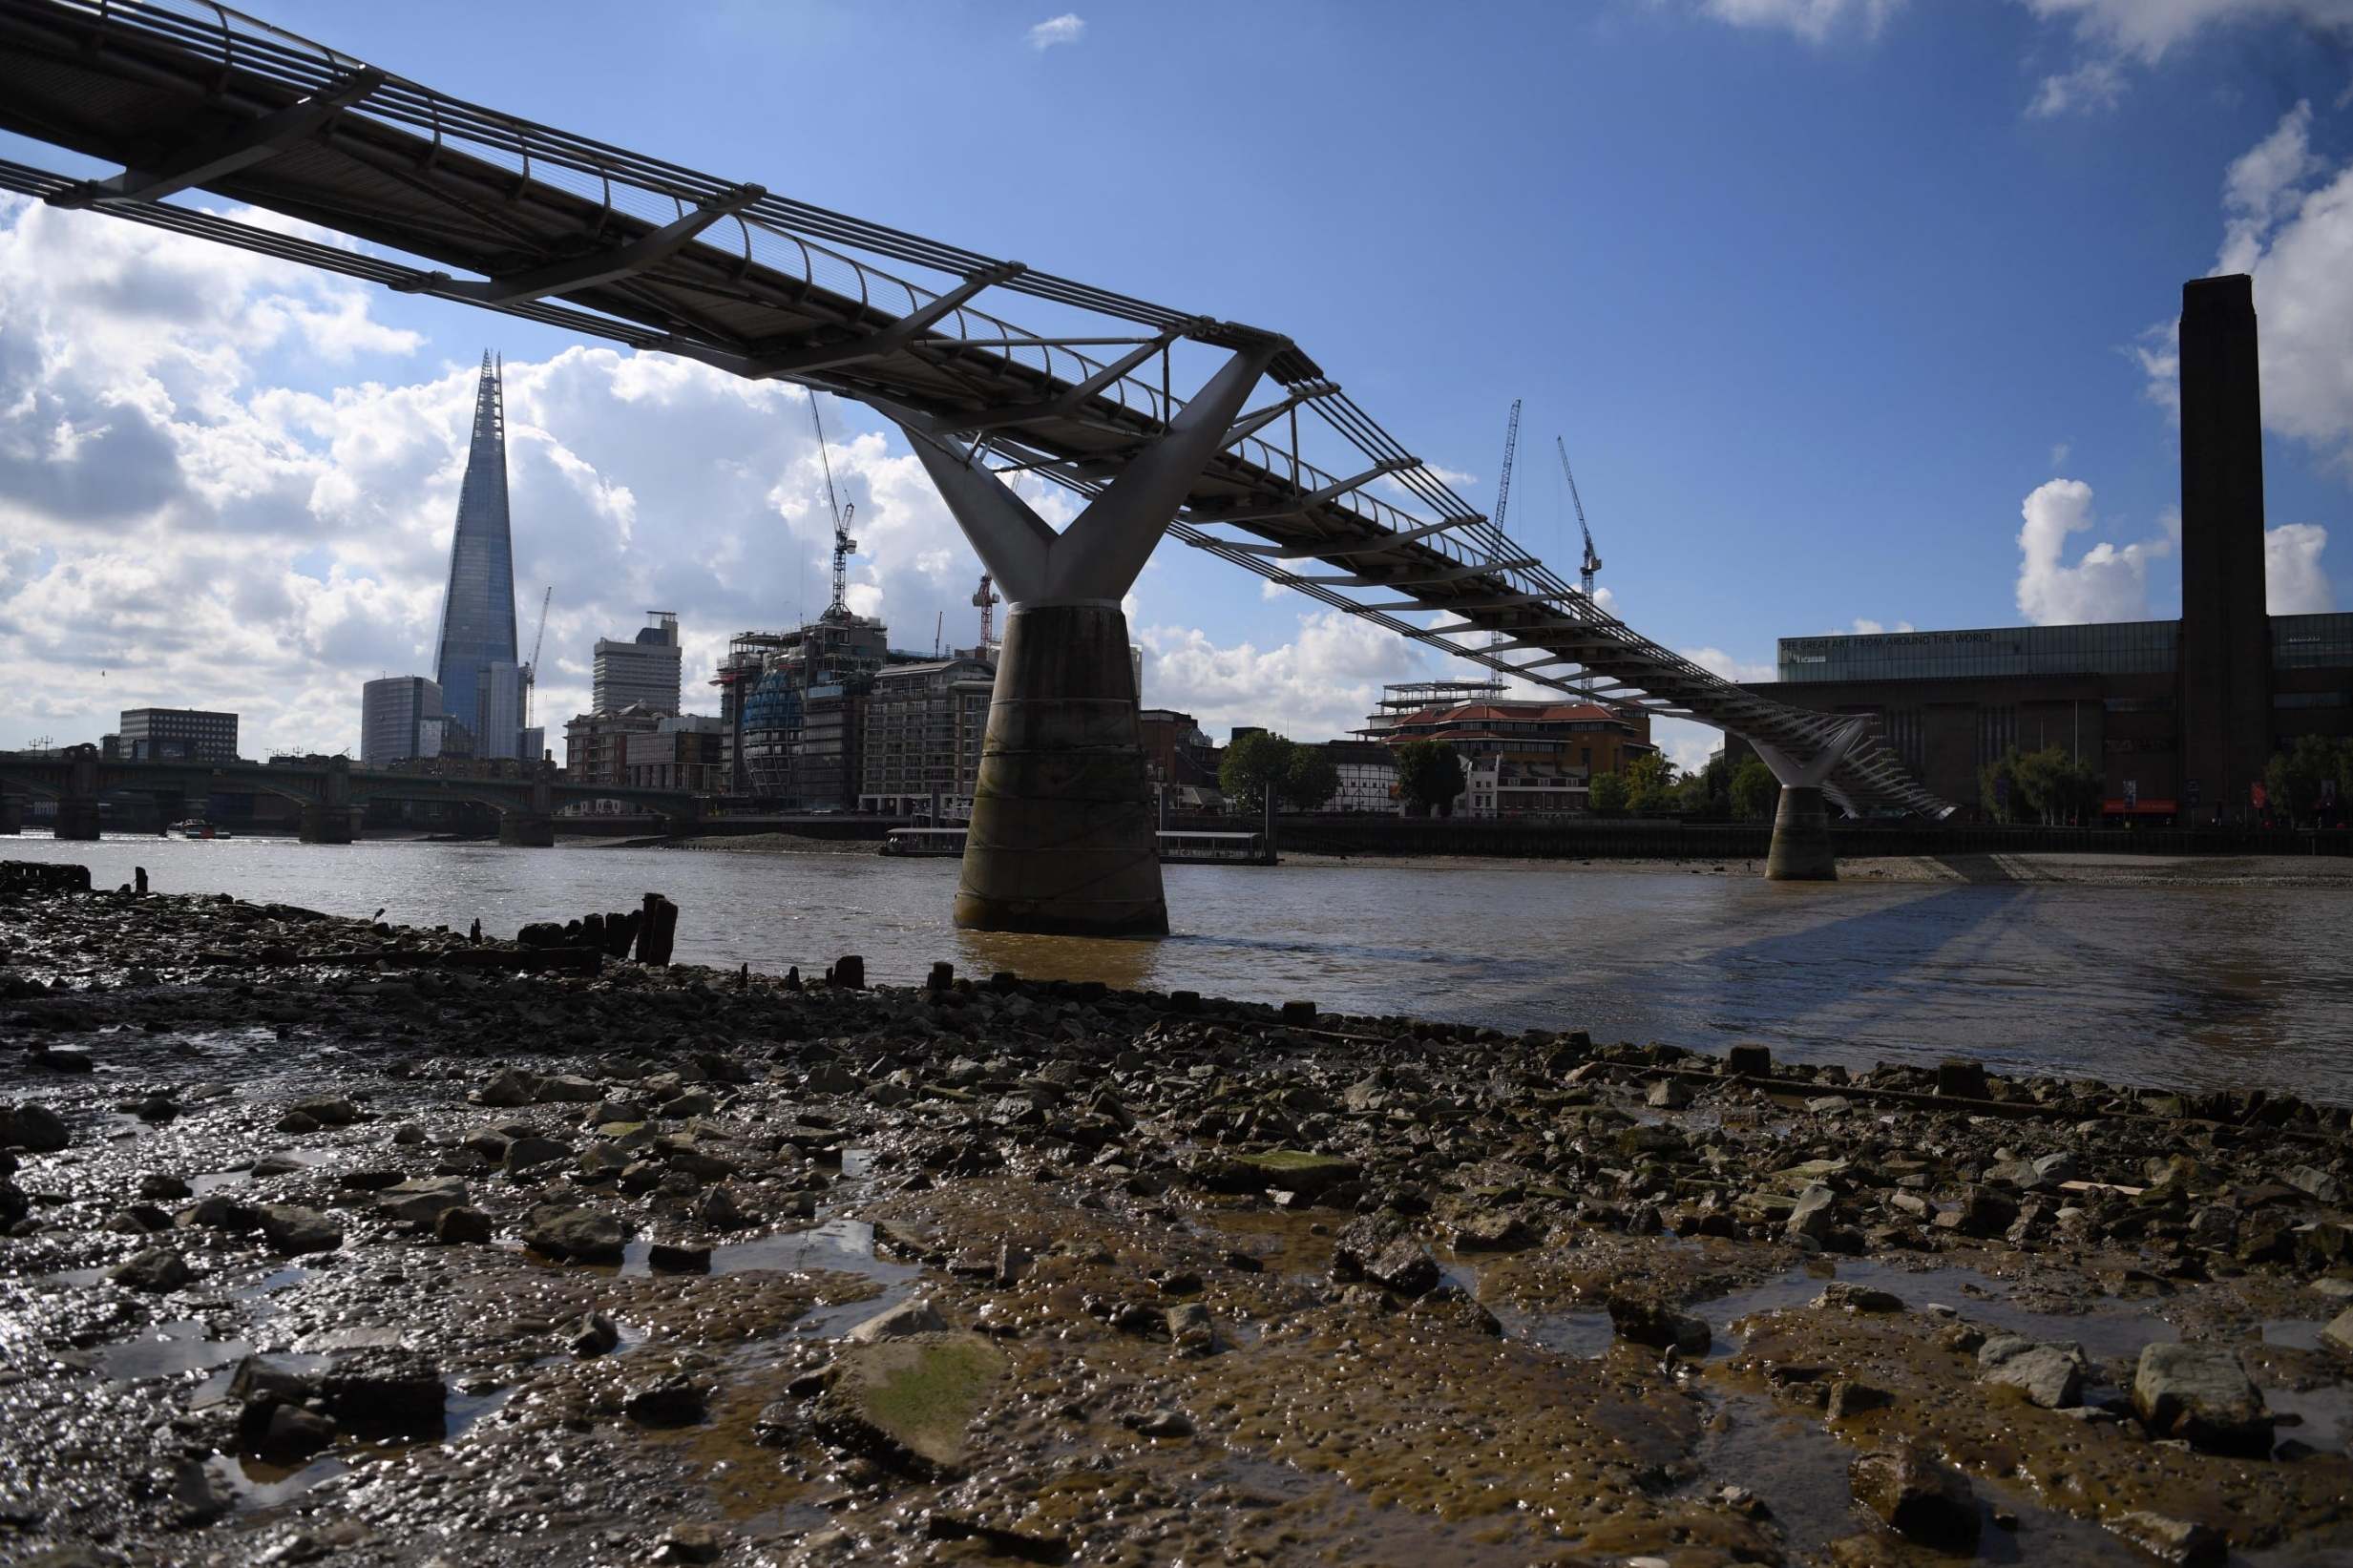 we-re-treating-the-river-like-a-toilet-londoners-warned-about-taking